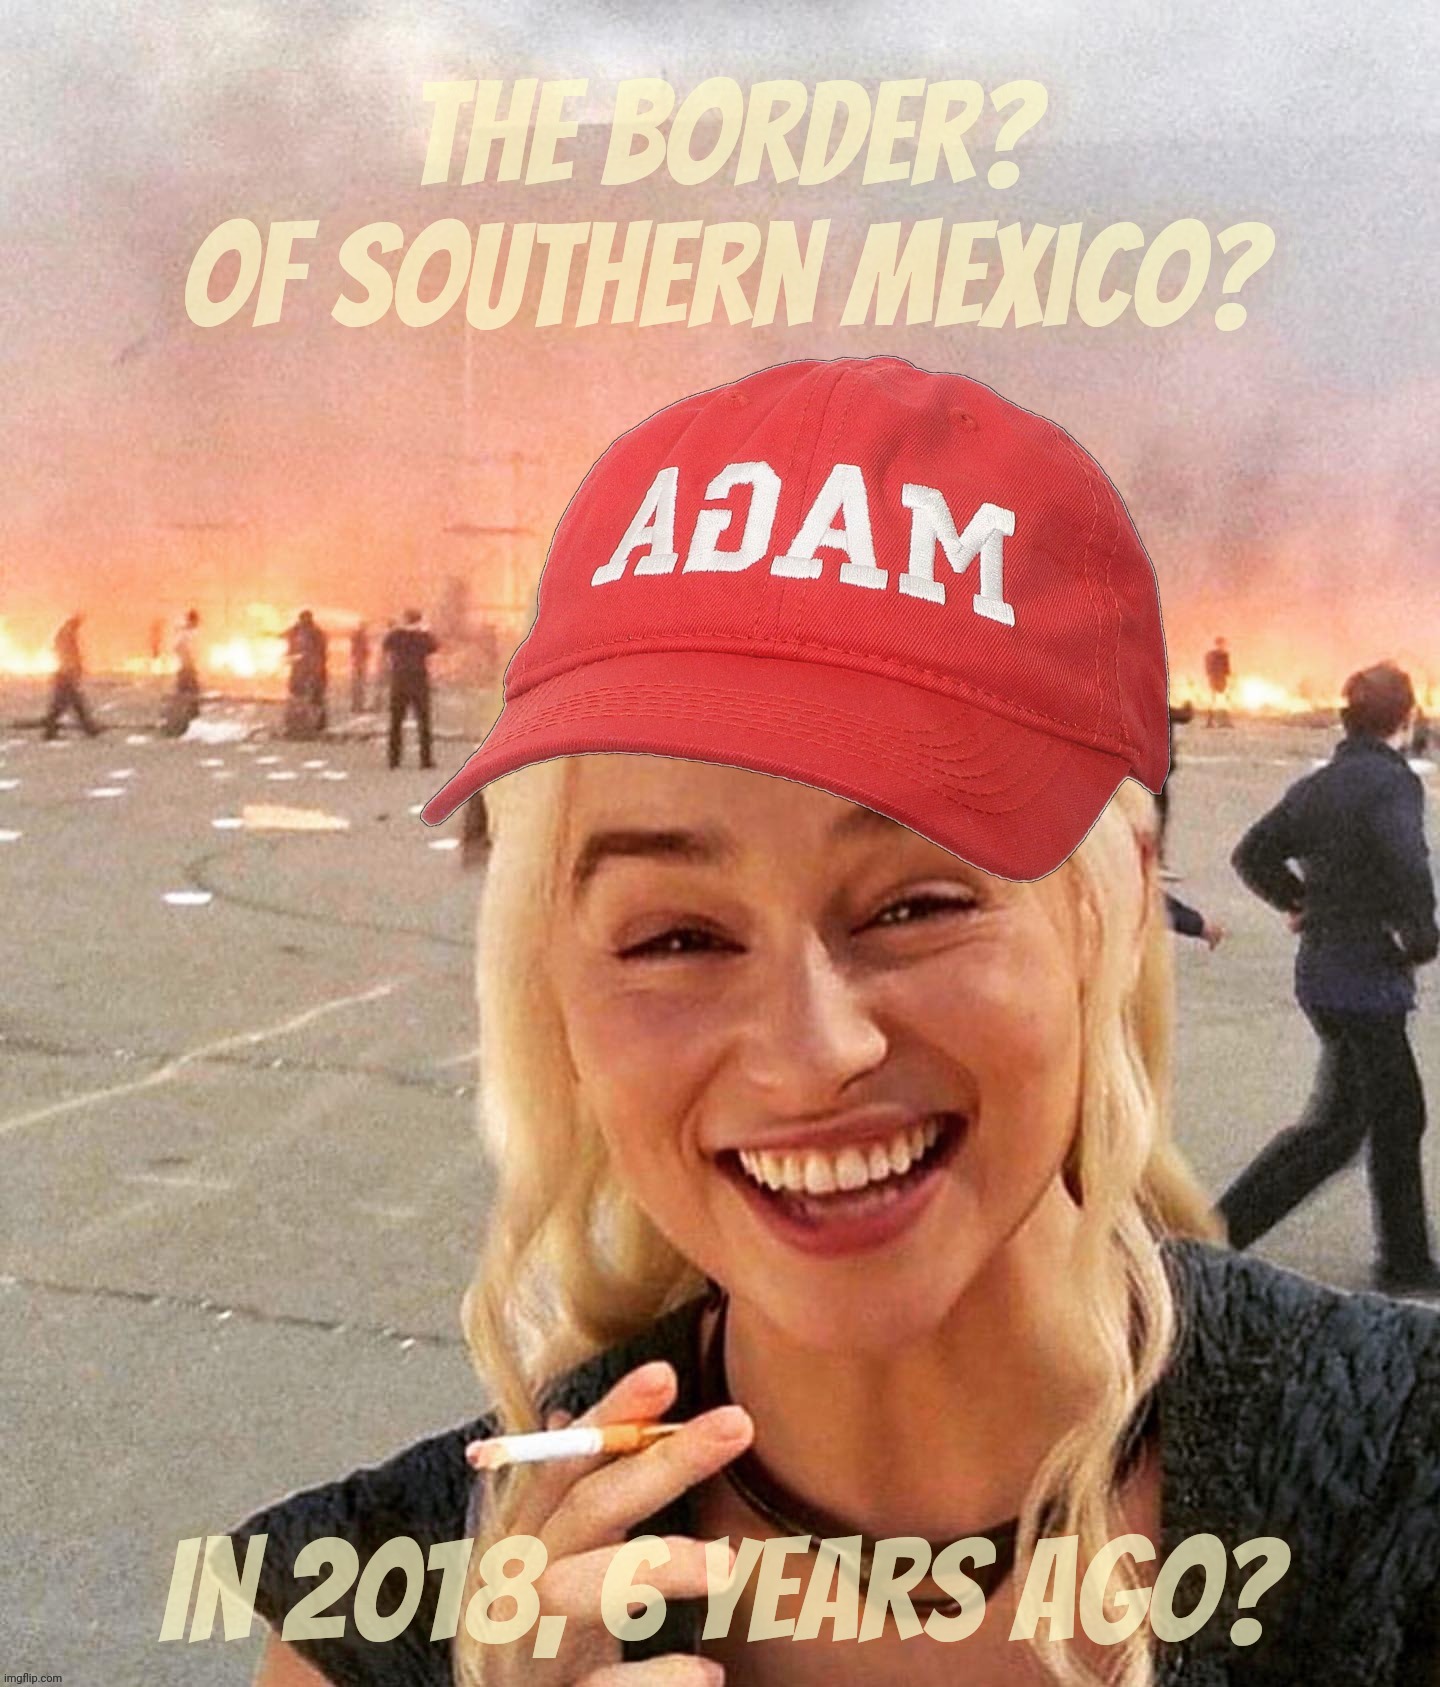 Disaster smoker girl MAGA edition | The border? Of southern Mexico? In 2018, 6 years ago? | image tagged in disaster smoker girl maga edition | made w/ Imgflip meme maker